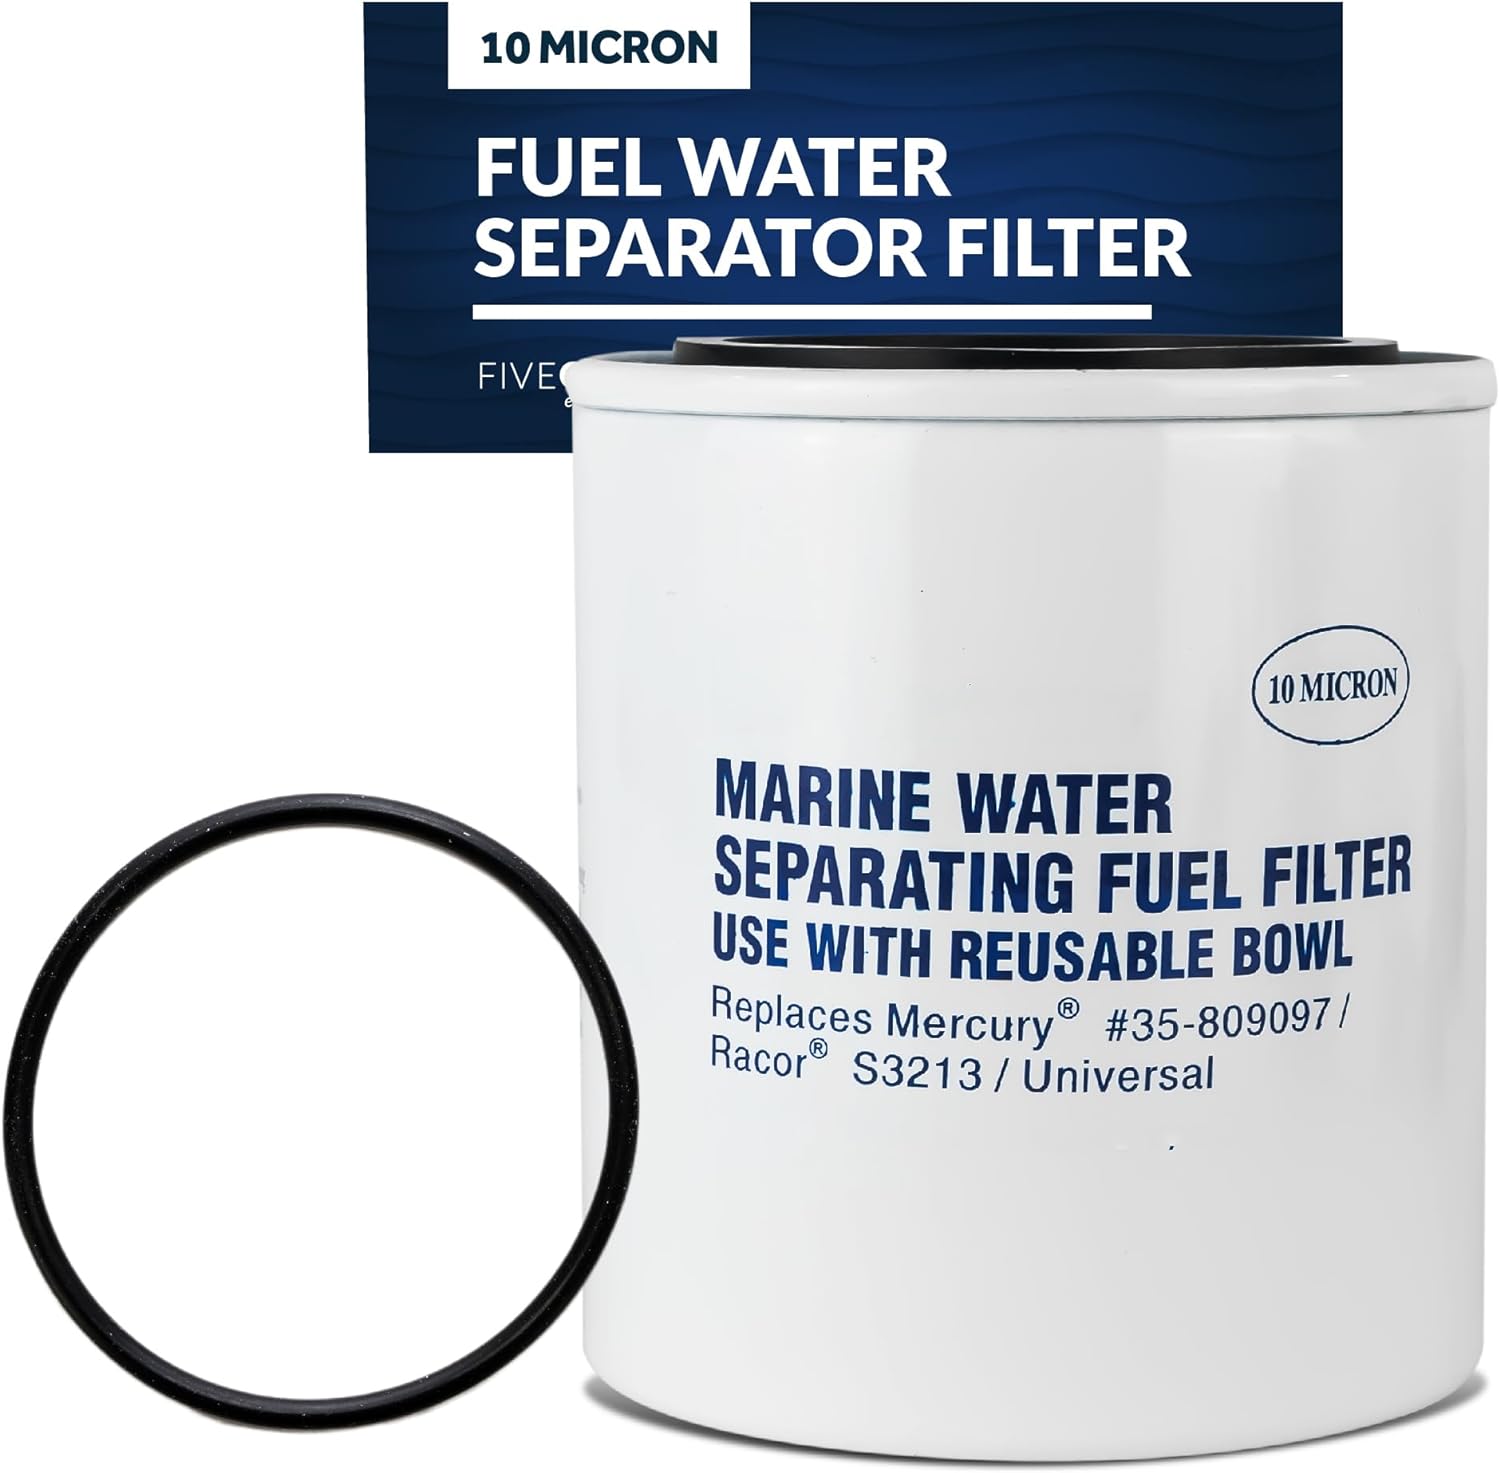 Fuel Water Separator Filter for Mercury 35-809097, Racor S3213 & Universal